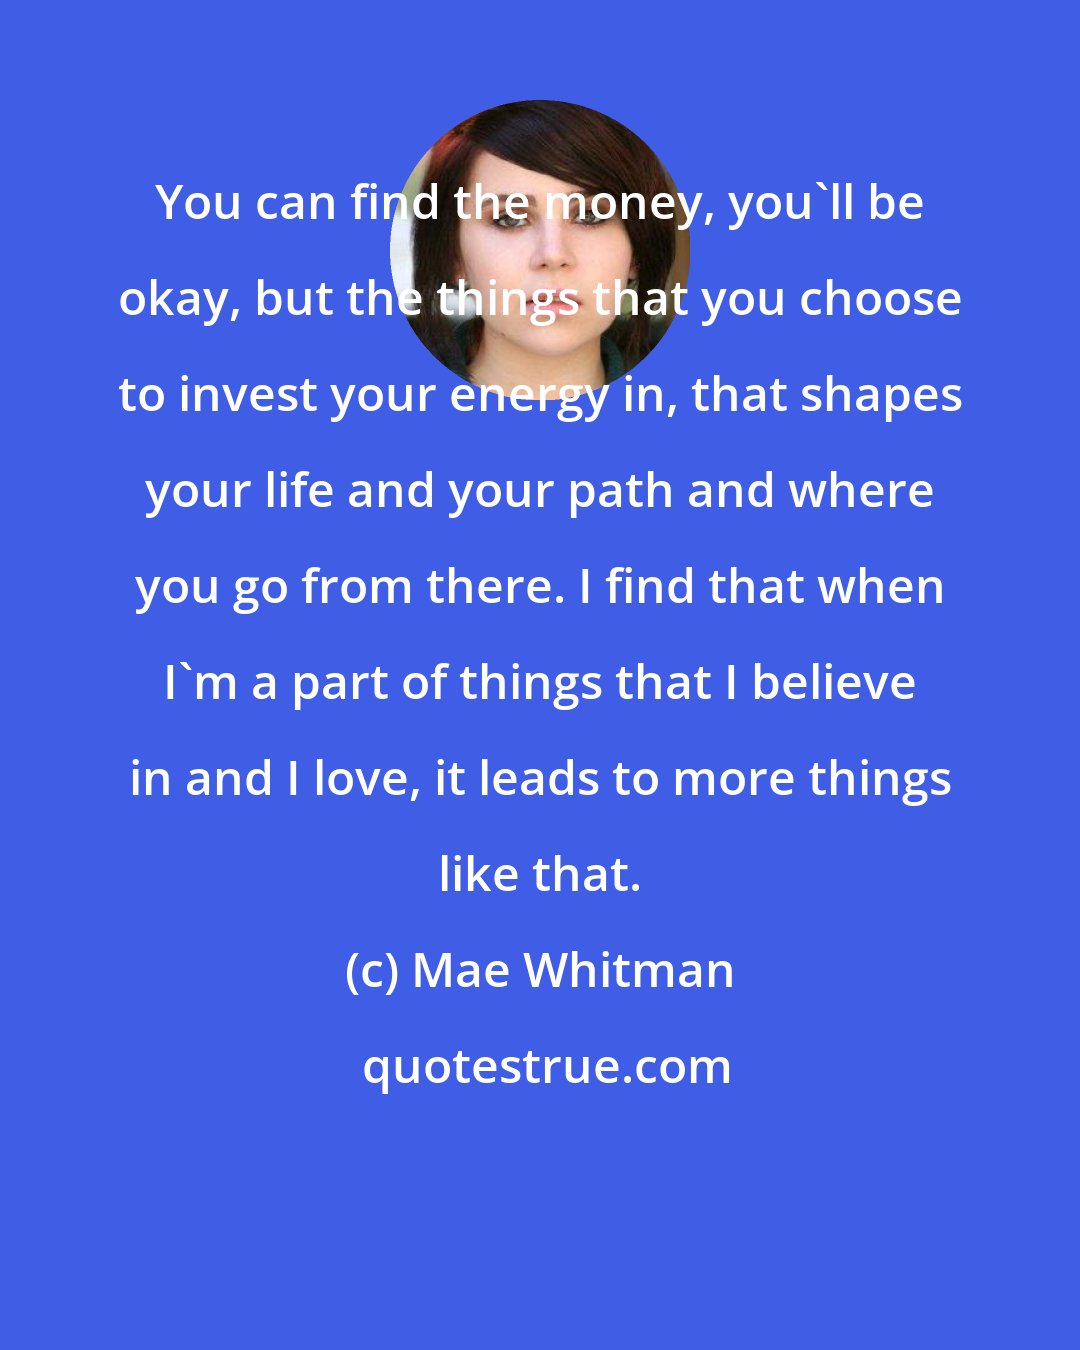 Mae Whitman: You can find the money, you'll be okay, but the things that you choose to invest your energy in, that shapes your life and your path and where you go from there. I find that when I'm a part of things that I believe in and I love, it leads to more things like that.